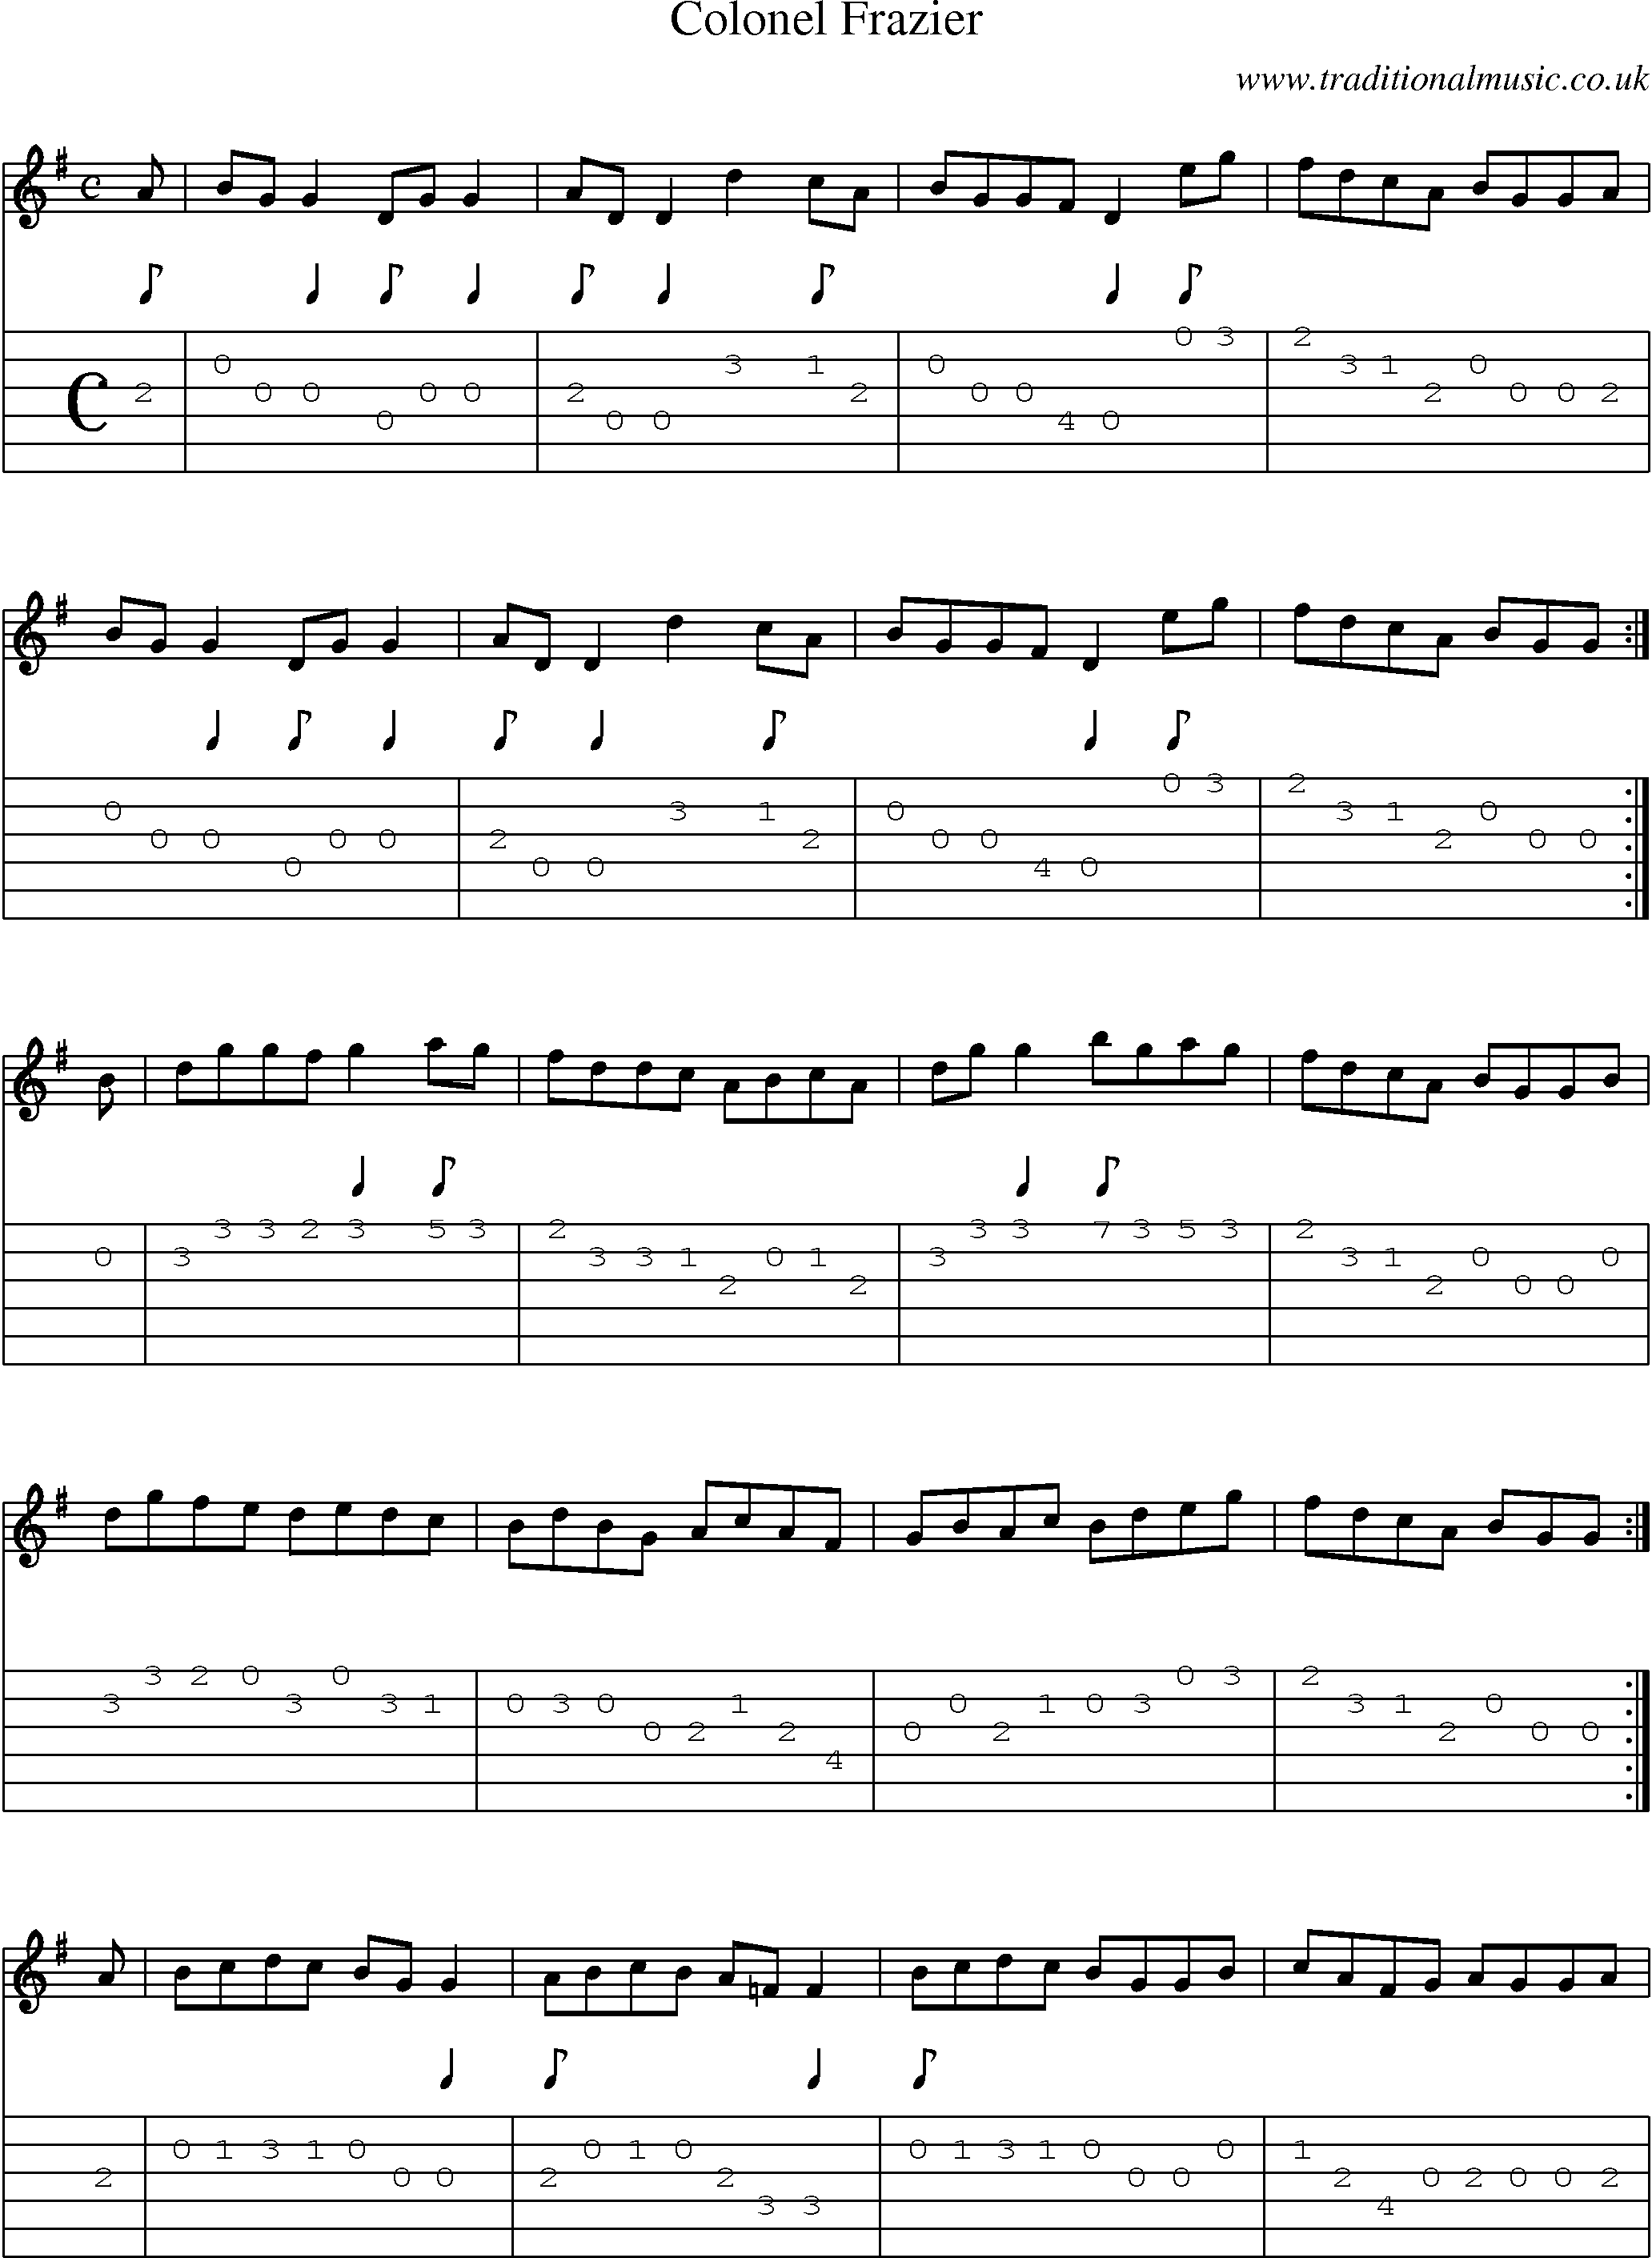 Music Score and Guitar Tabs for Colonel Frazier